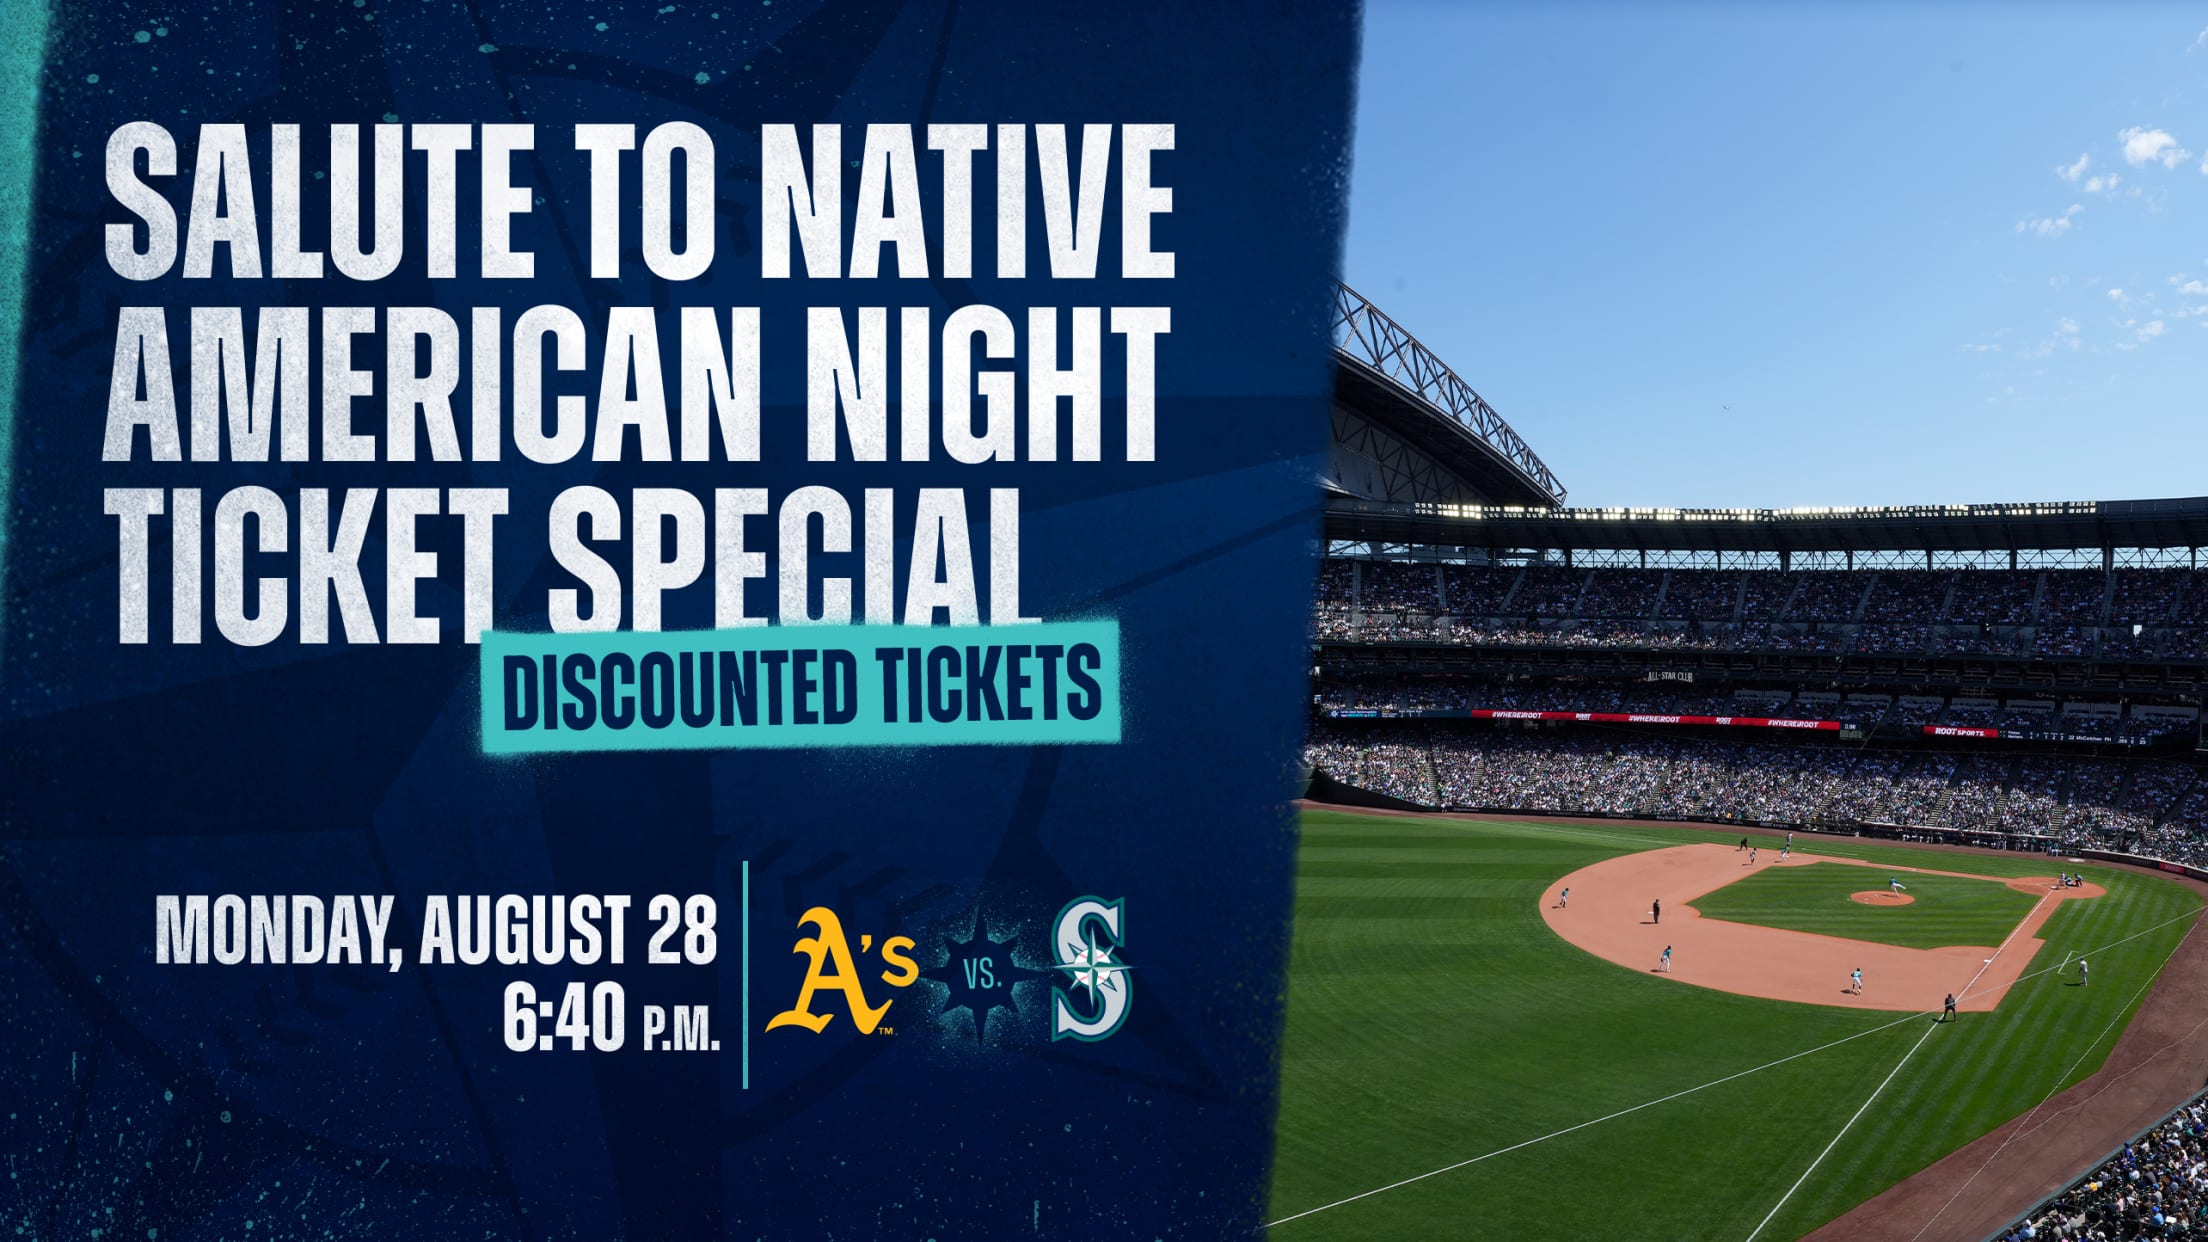 Don't Miss! SF Giants Native American Heritage Night 